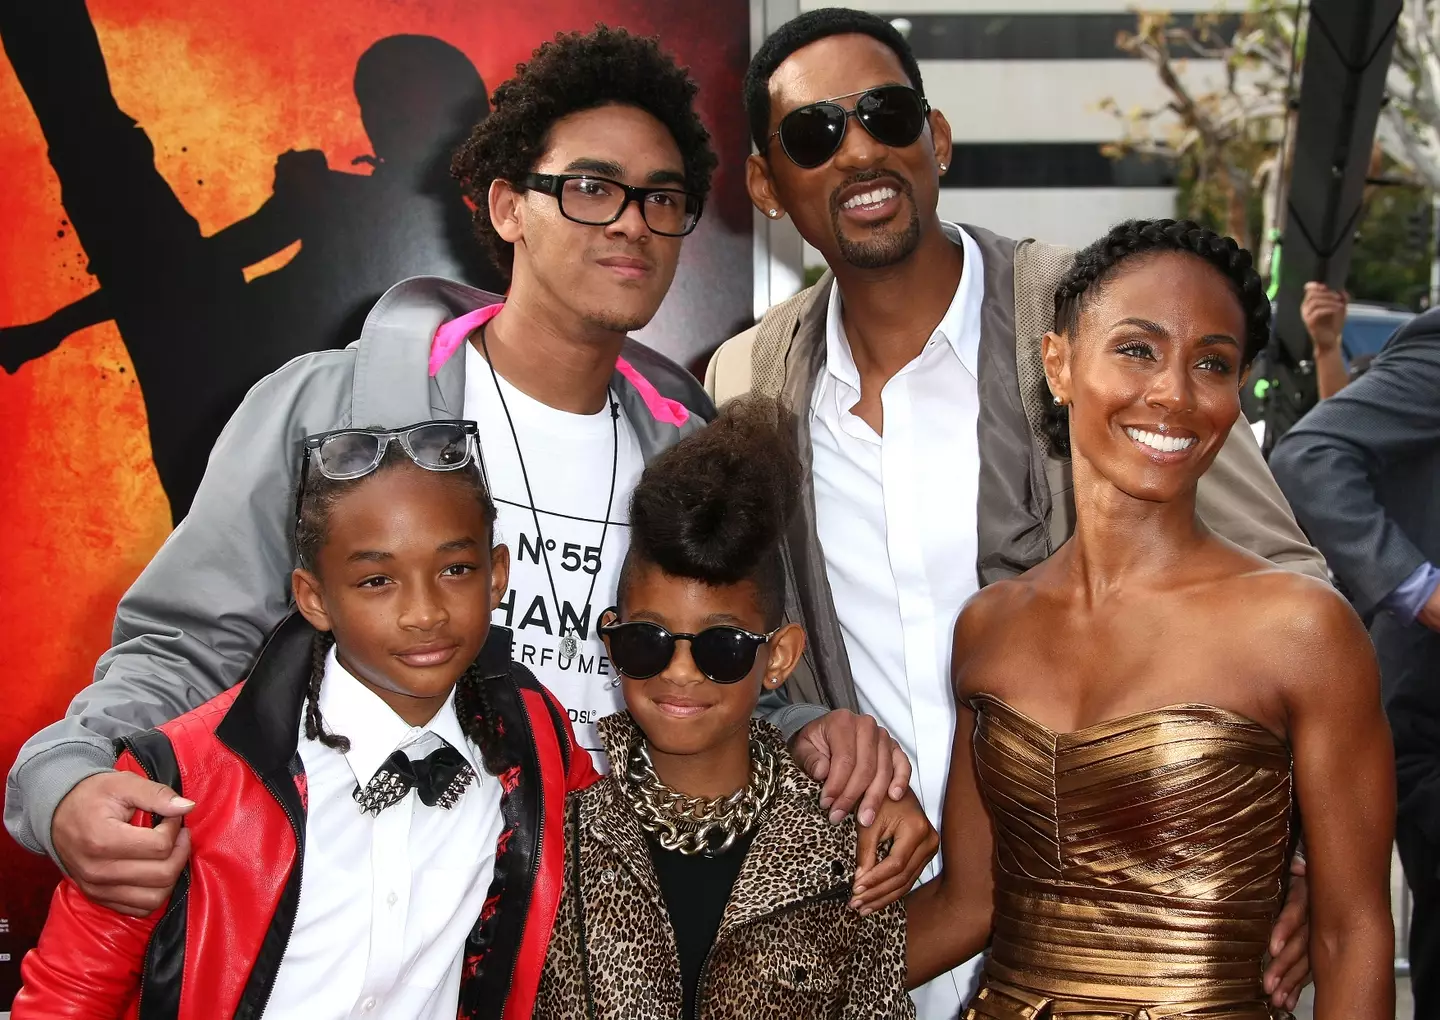 The family attends the premiere of The Karate Kid starring Jaden. (